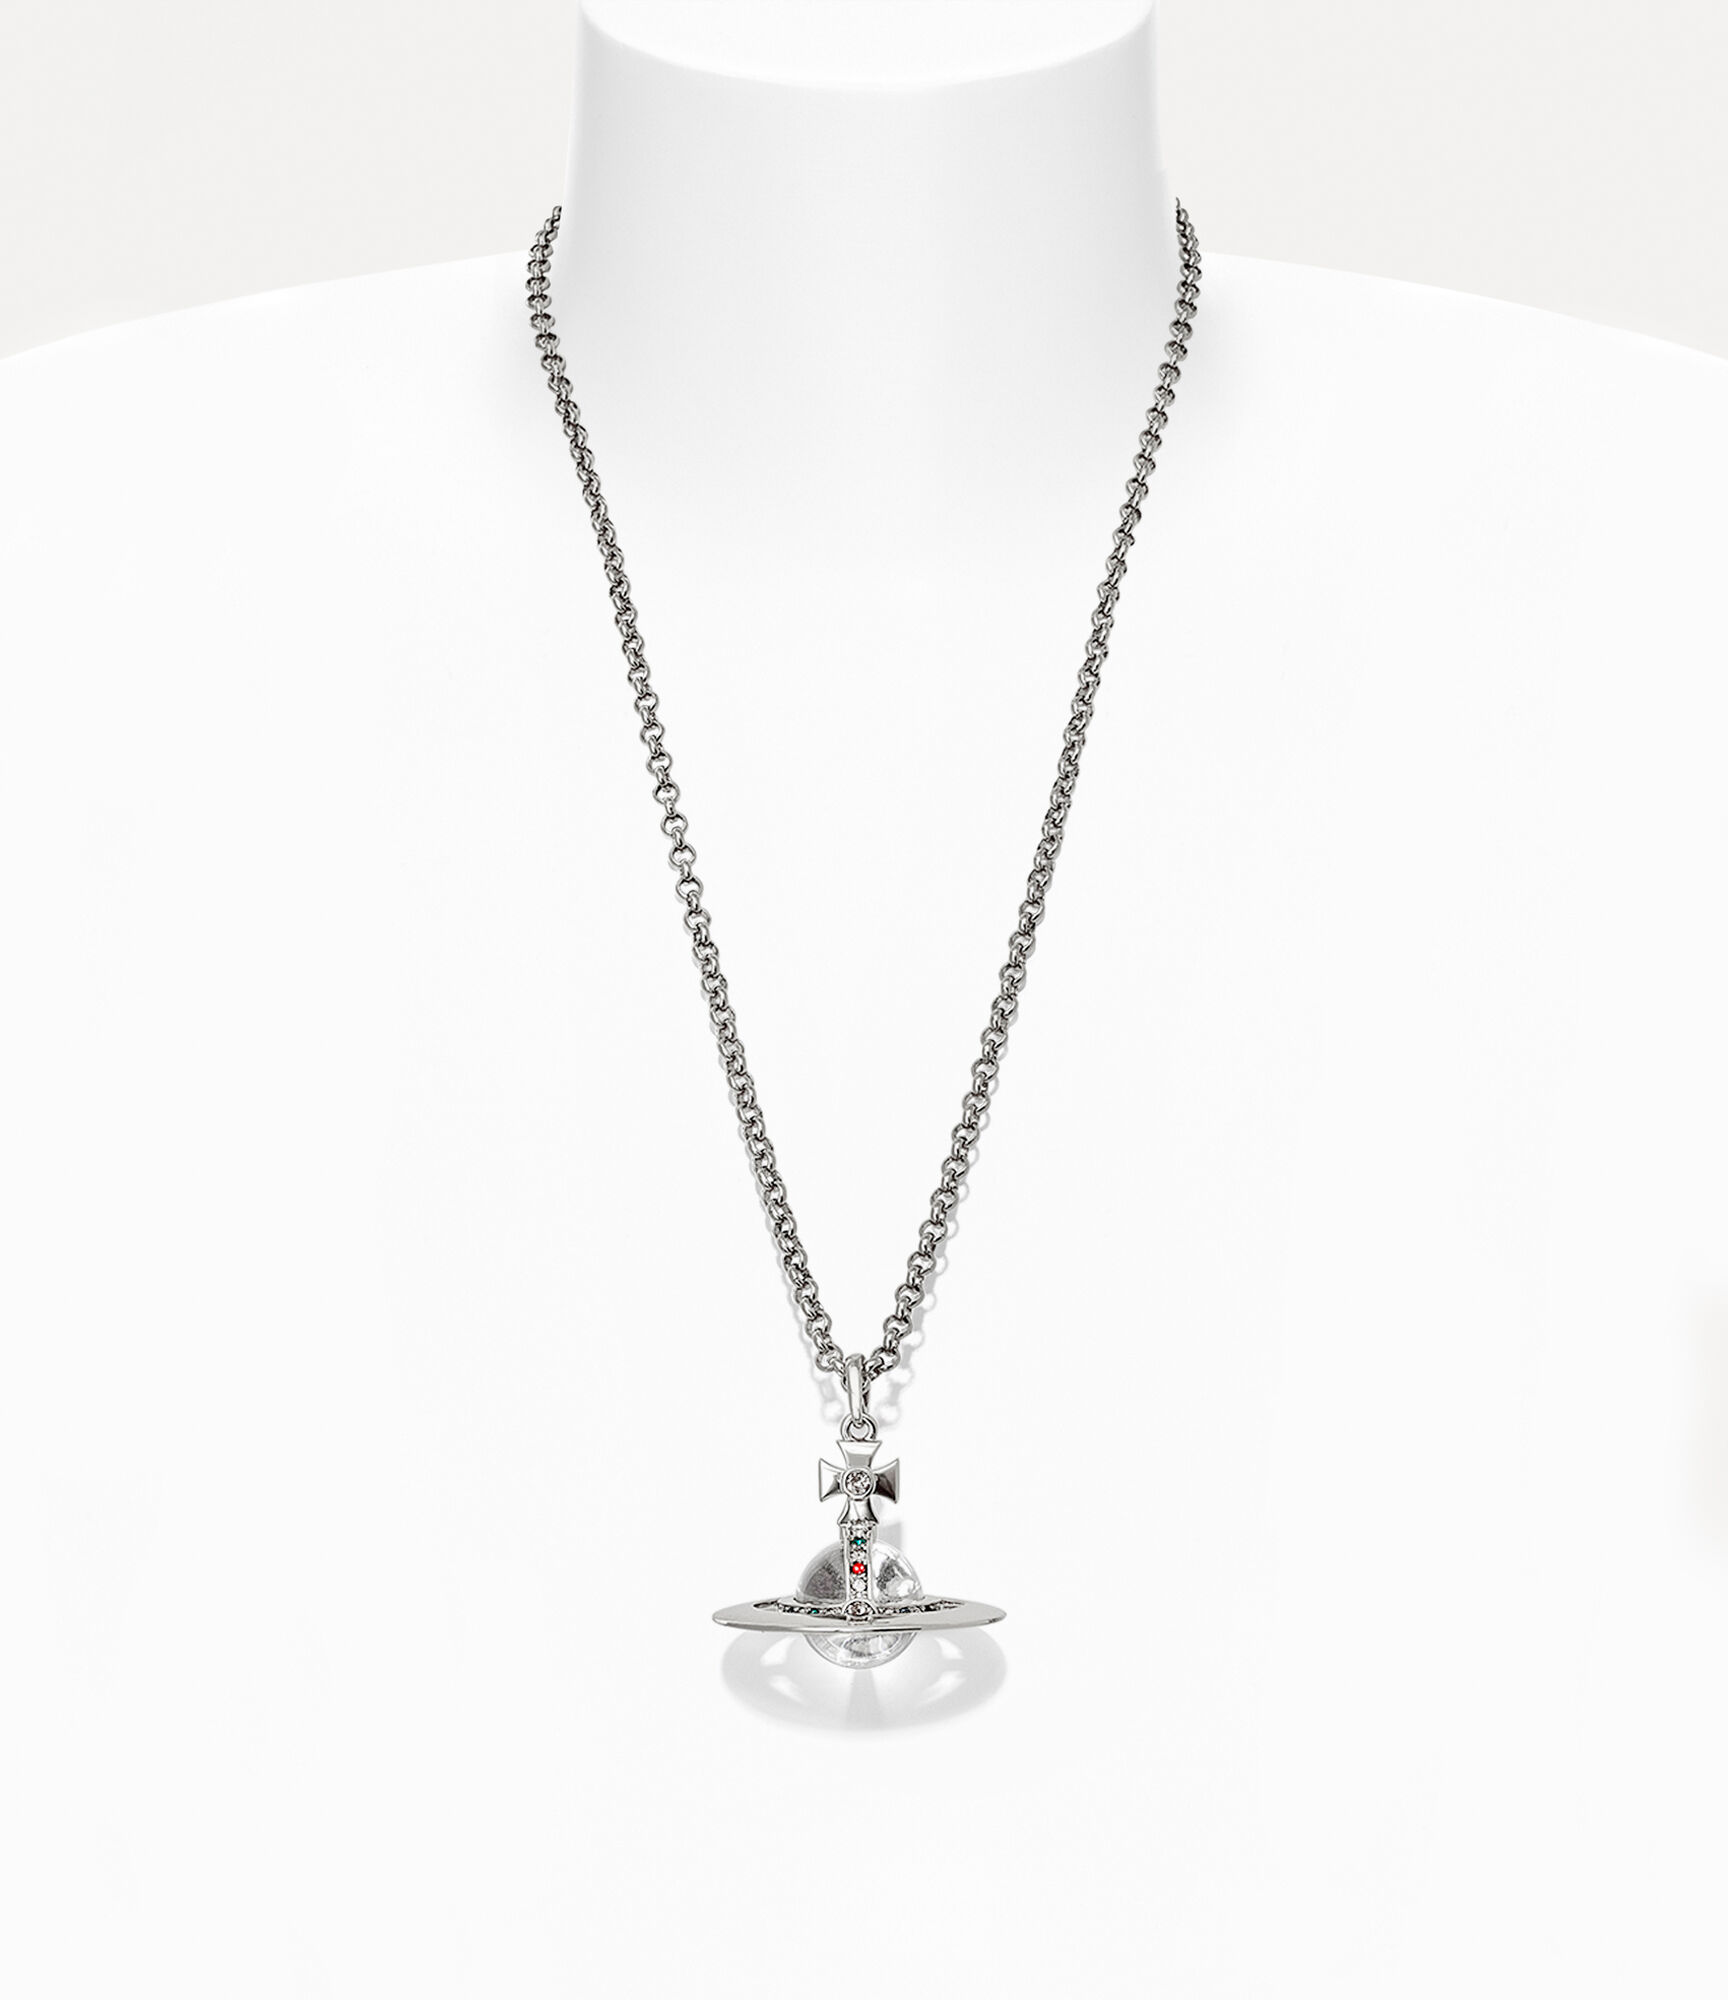 New Small Orb Pendant Necklace in PLATINUM | Vivienne Westwood®